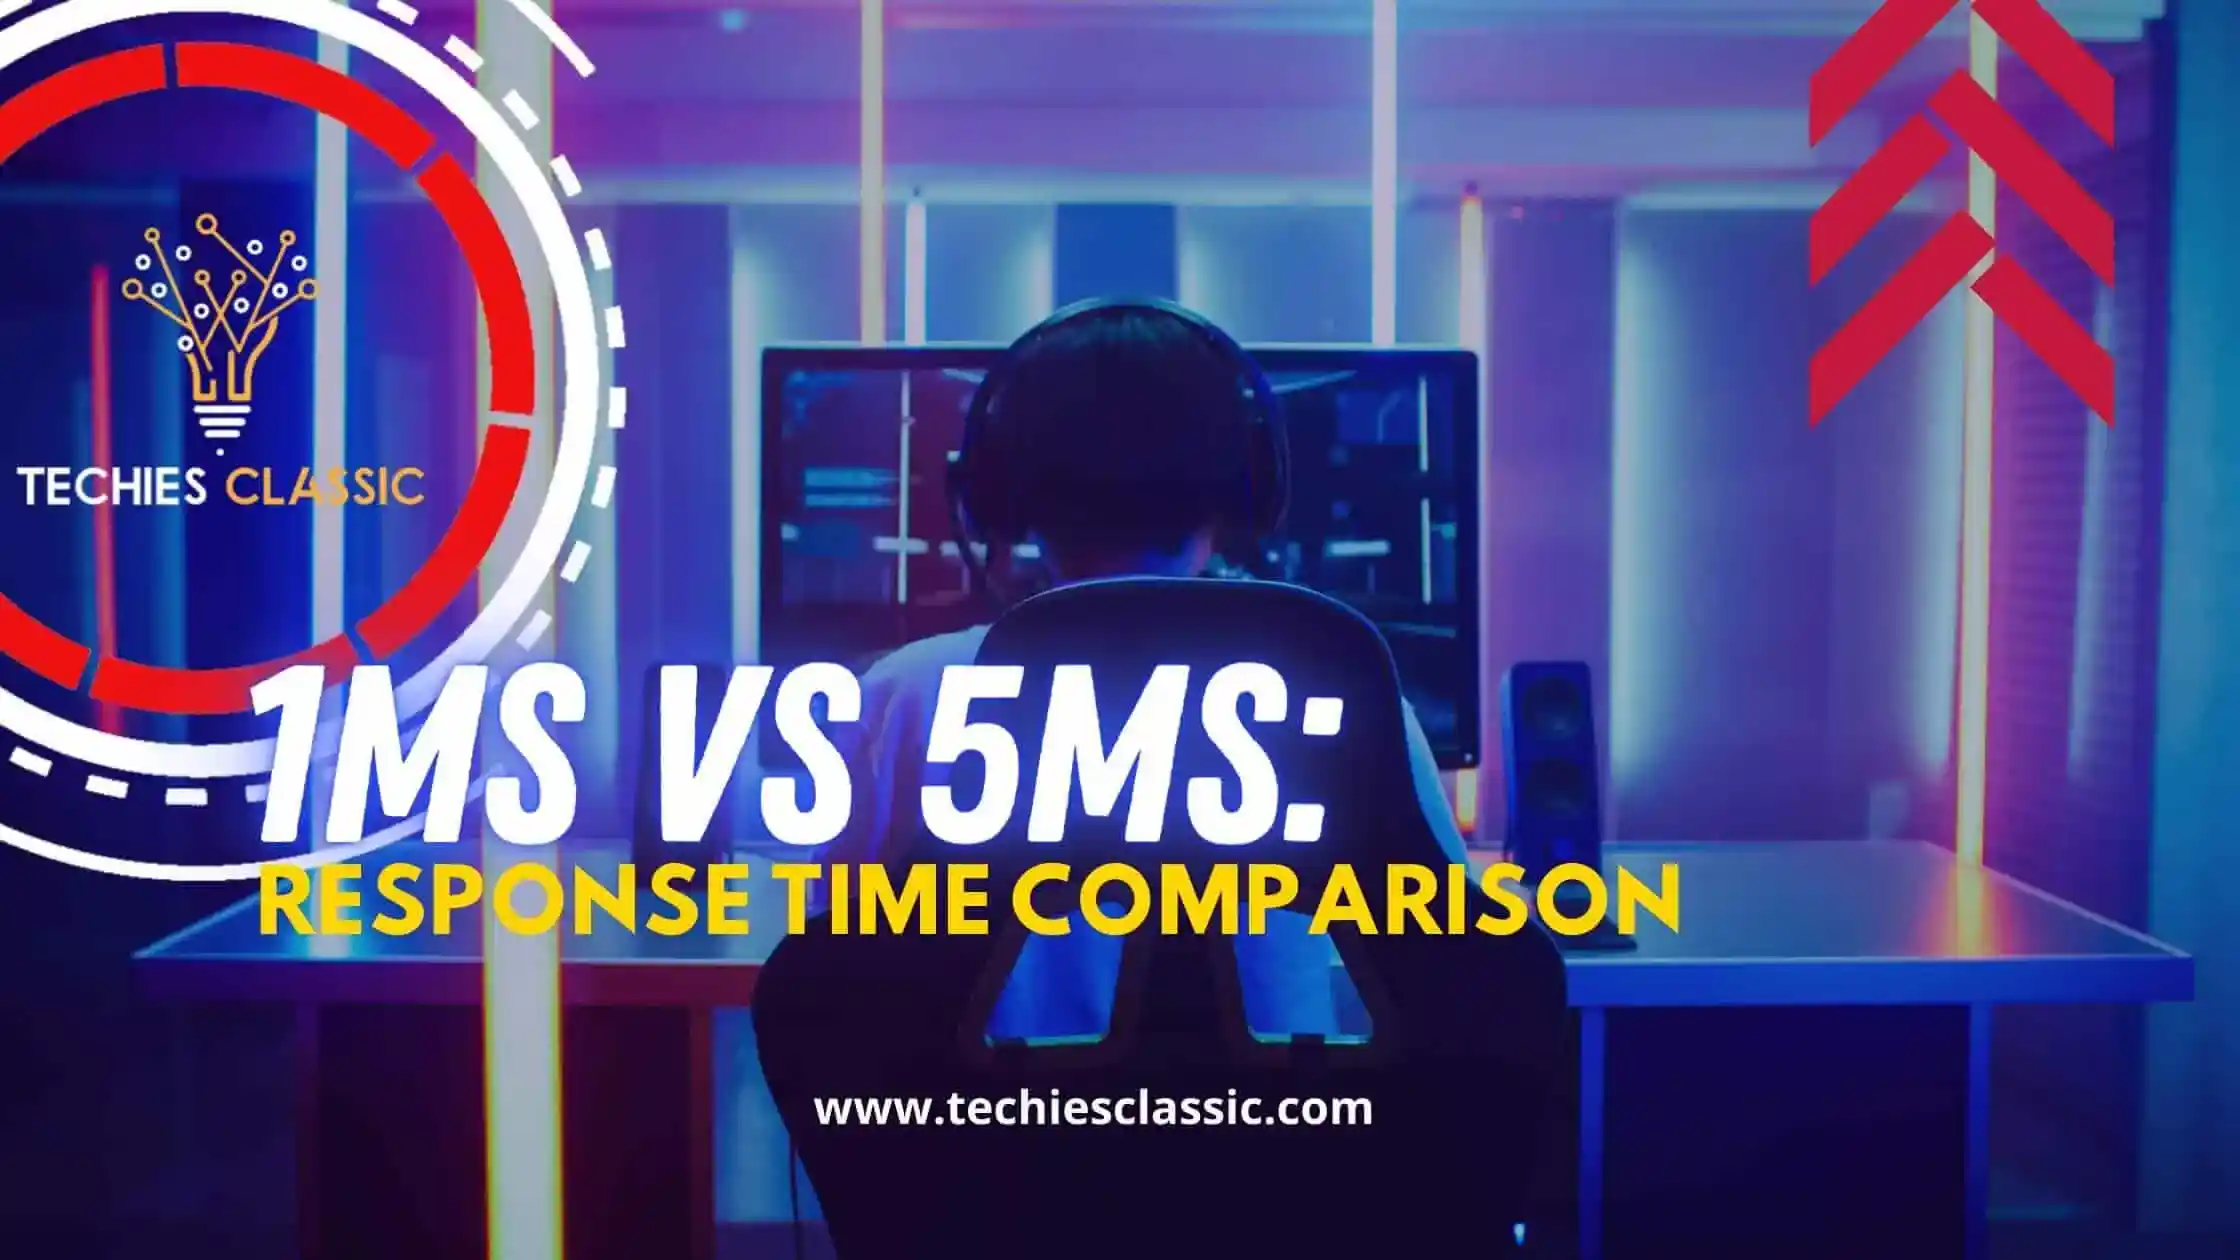 Classic 1ms vs 5ms Response Time Comparison With The Best Monitors